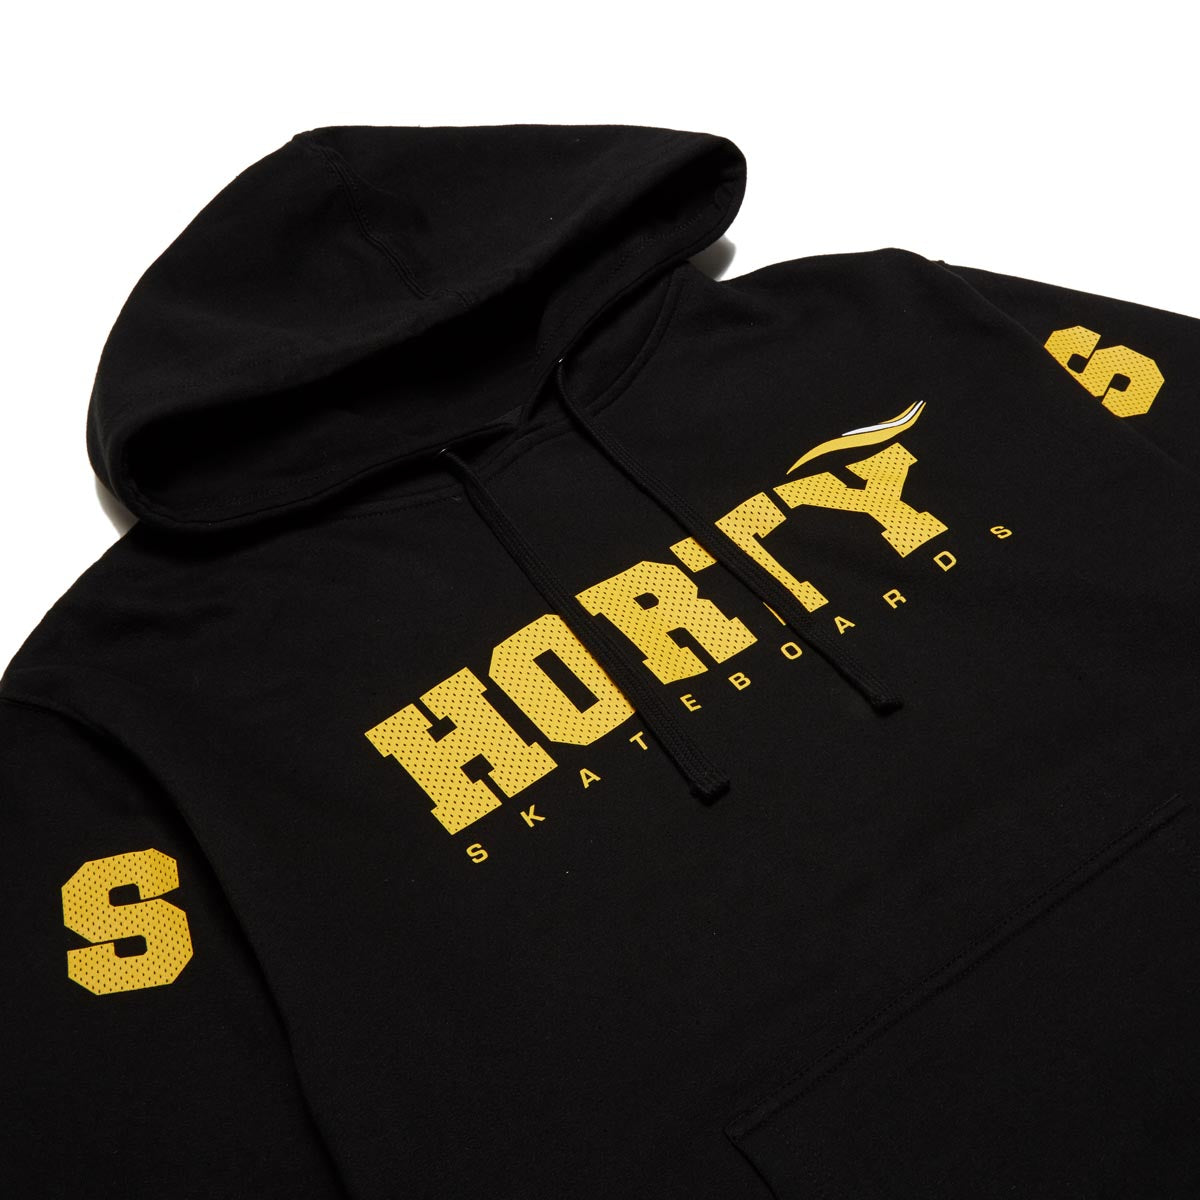 Shorty's S-horty-S Mesh Hoodie - Black image 2